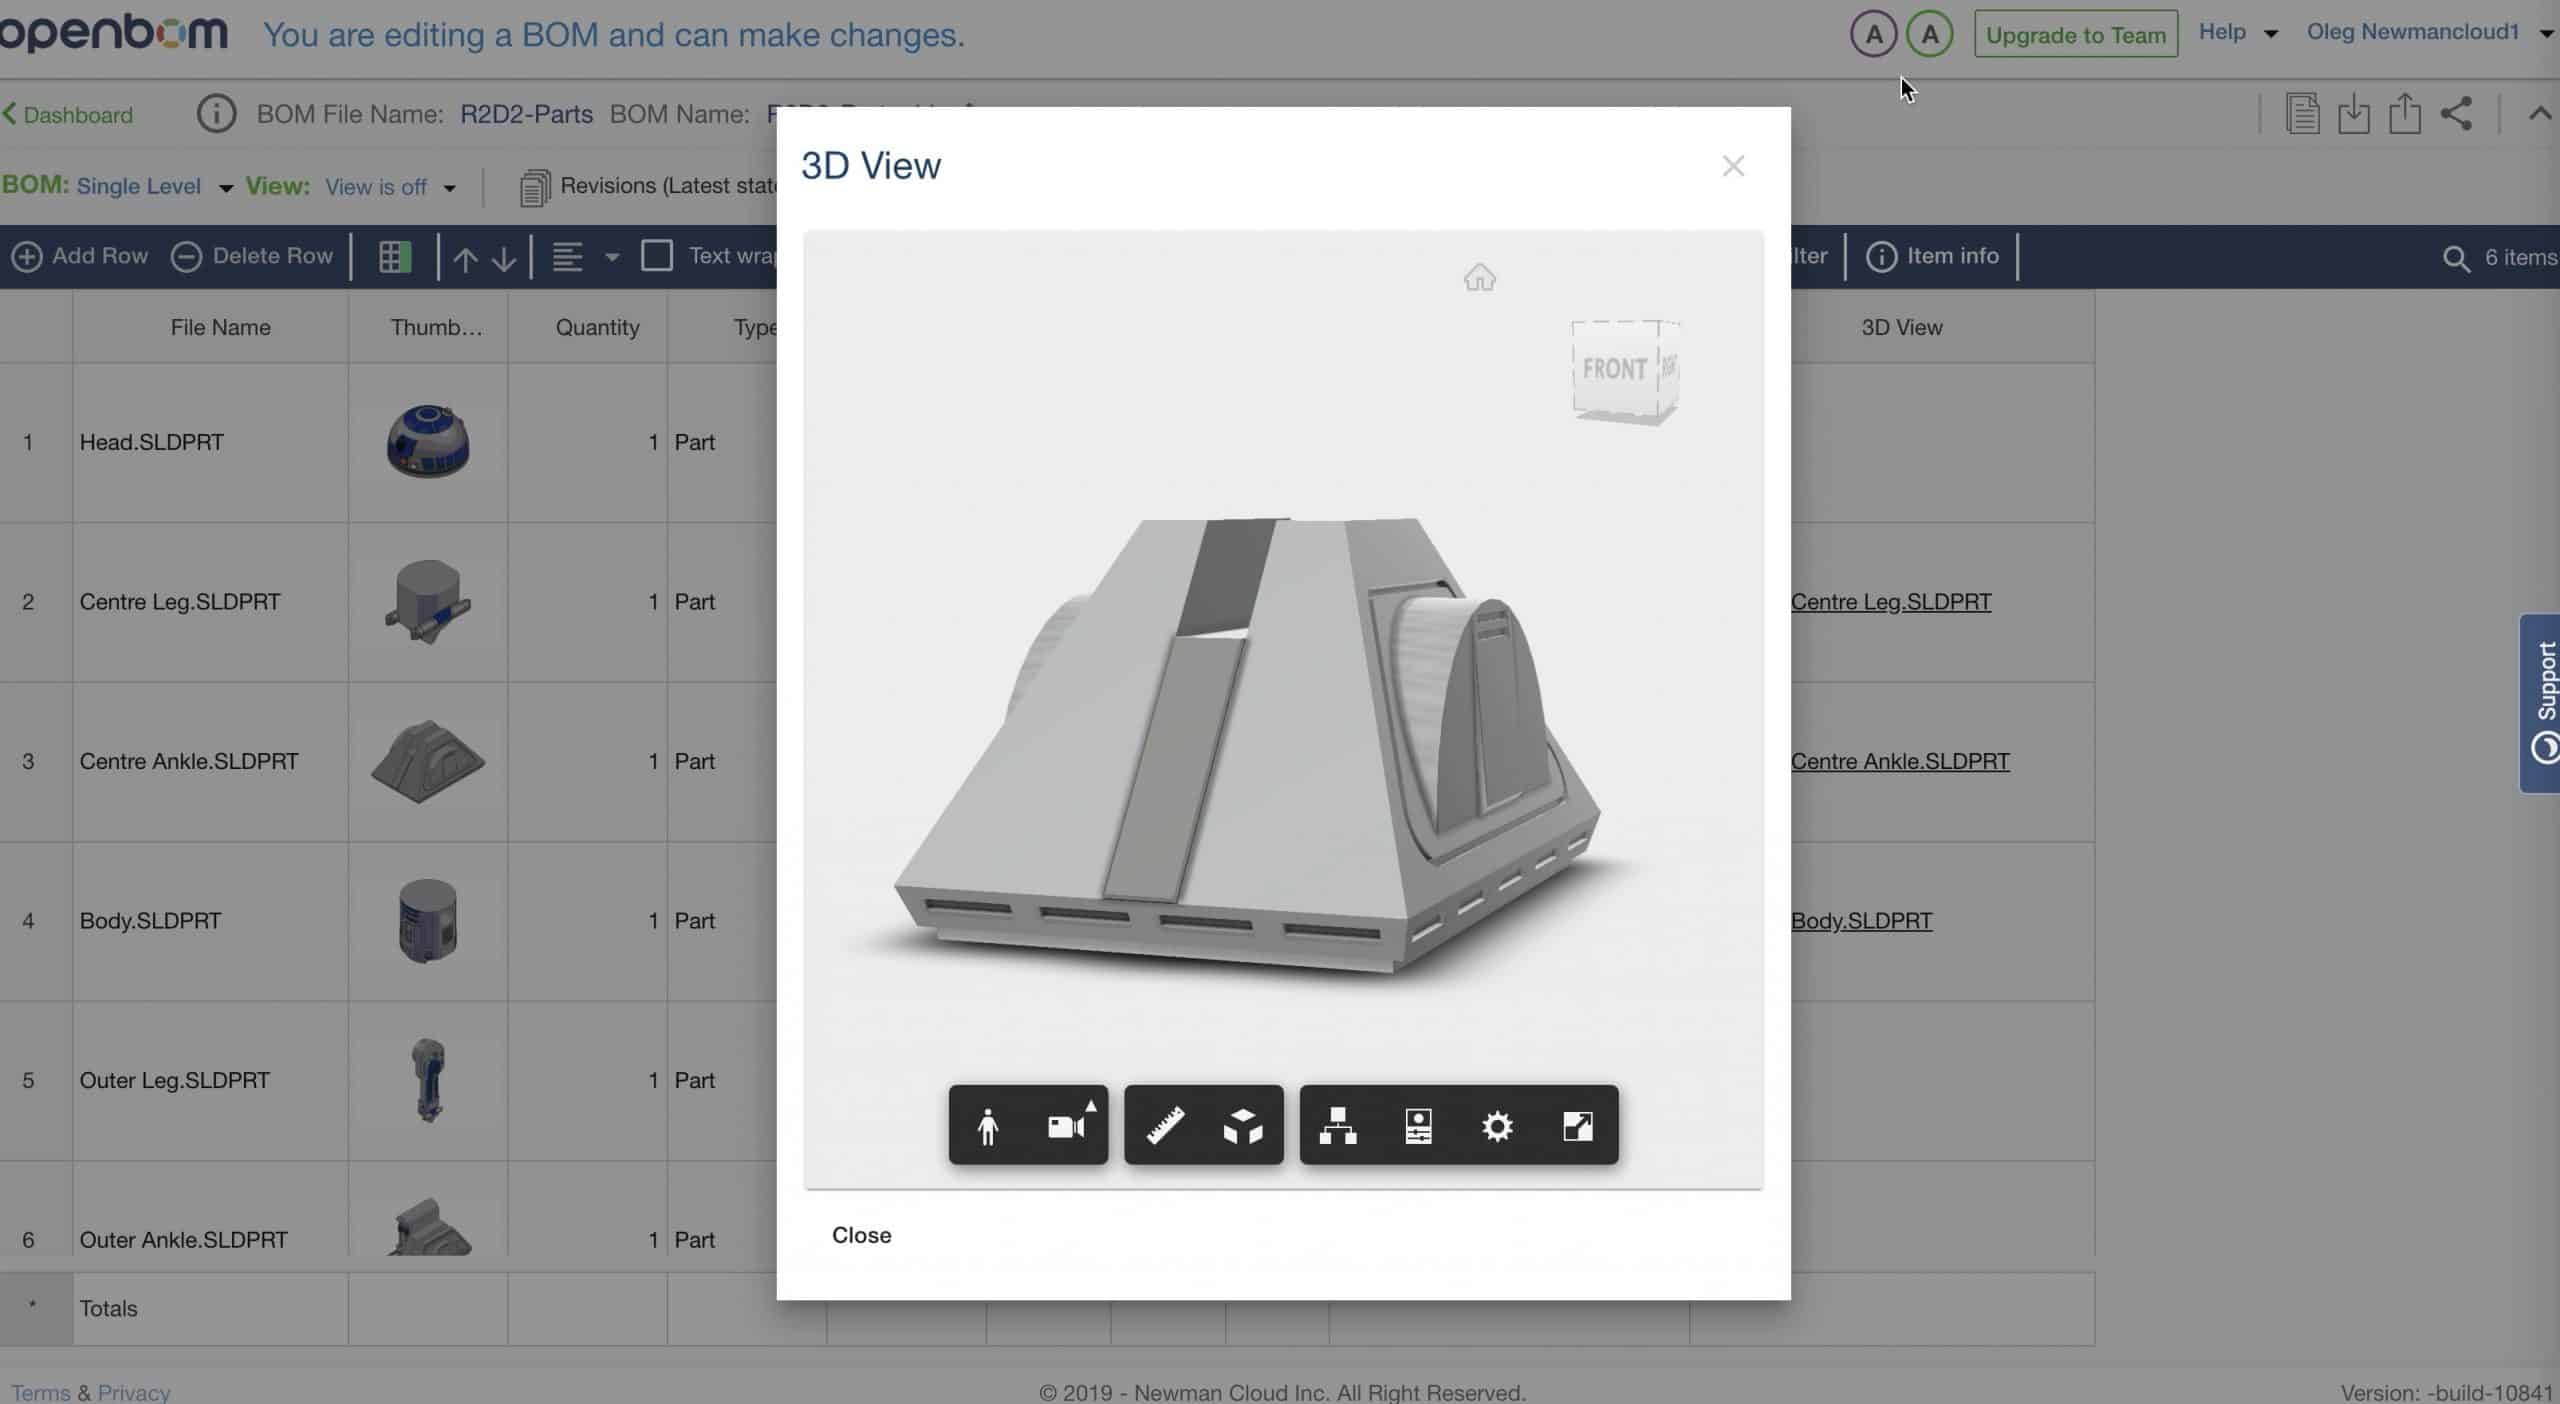 Early Preview – From Visual BOM with Images to OpenBOM Integrated 3D Viewer